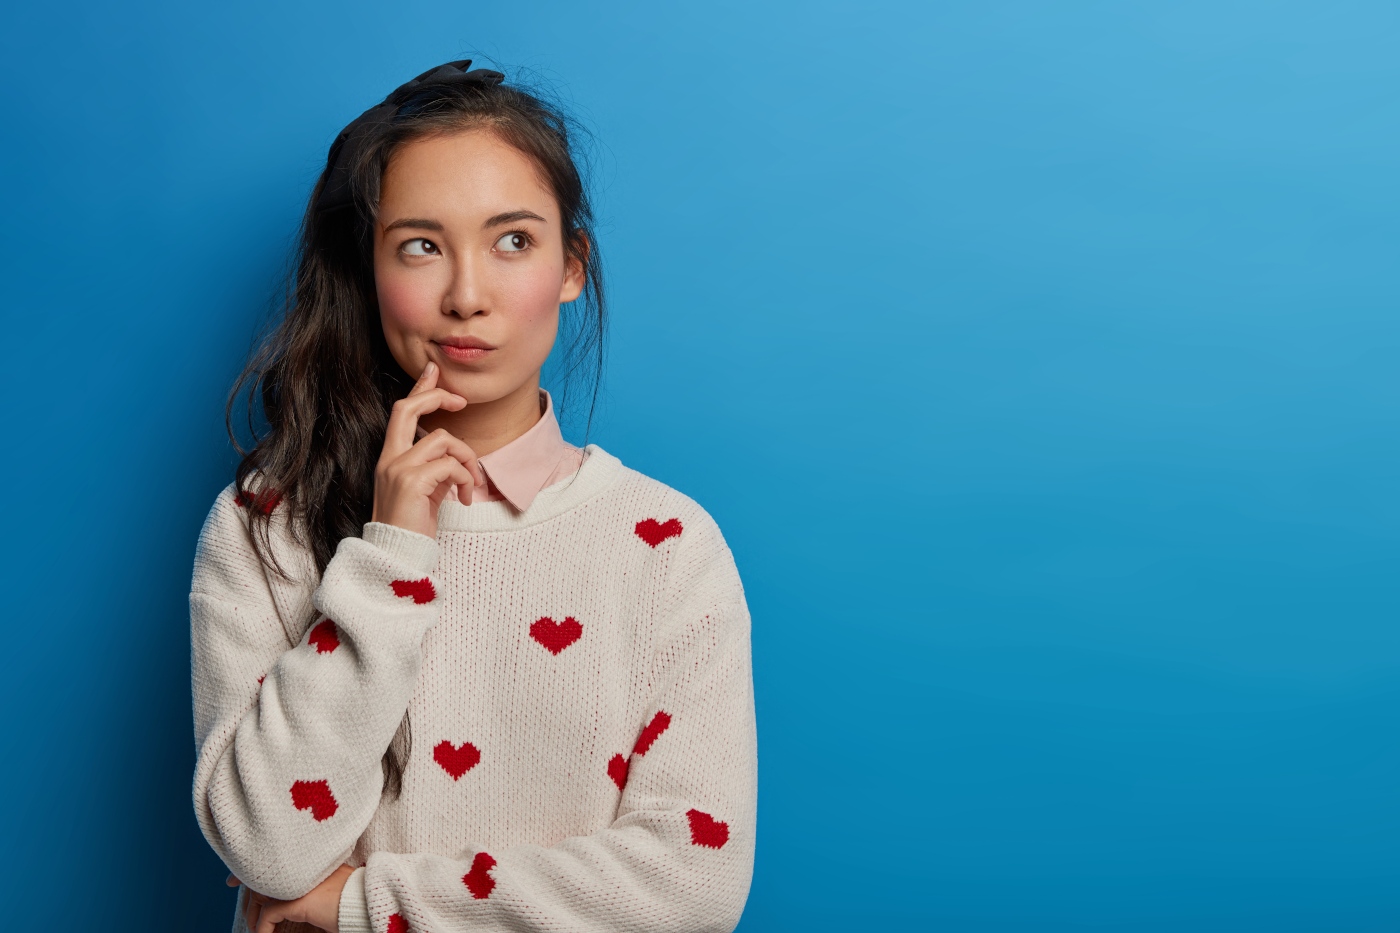 Contemplative pretty millennial young Asian woman looks away, builds plans in mind, has thoughtful face expression, long dark pony tail, wears sweater with hearts, isolated over blue background.